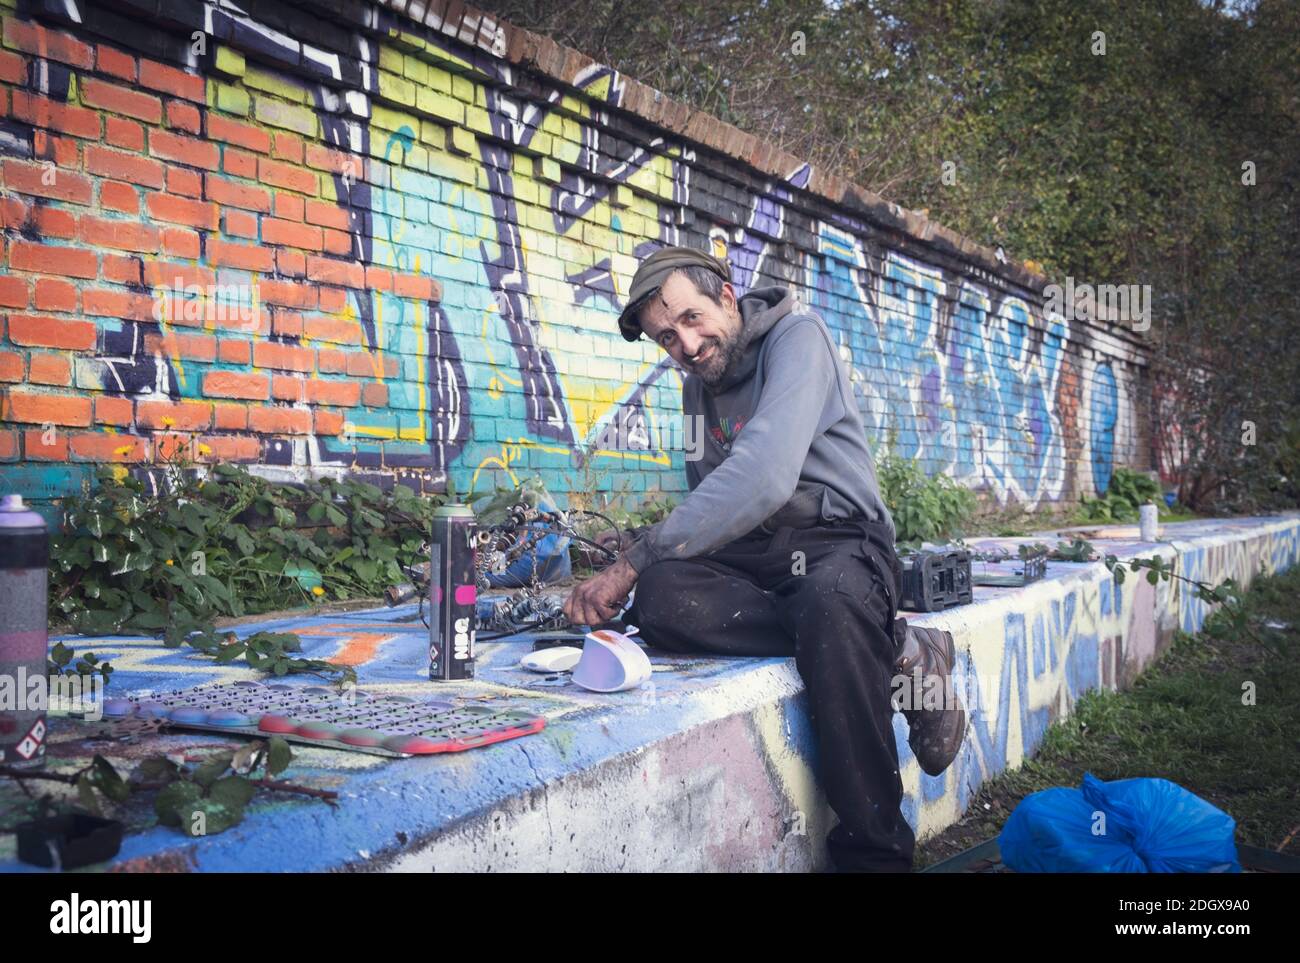 A local street artist and sculptor working outdoors in the Lea Valley, Hackney, London, UK Stock Photo